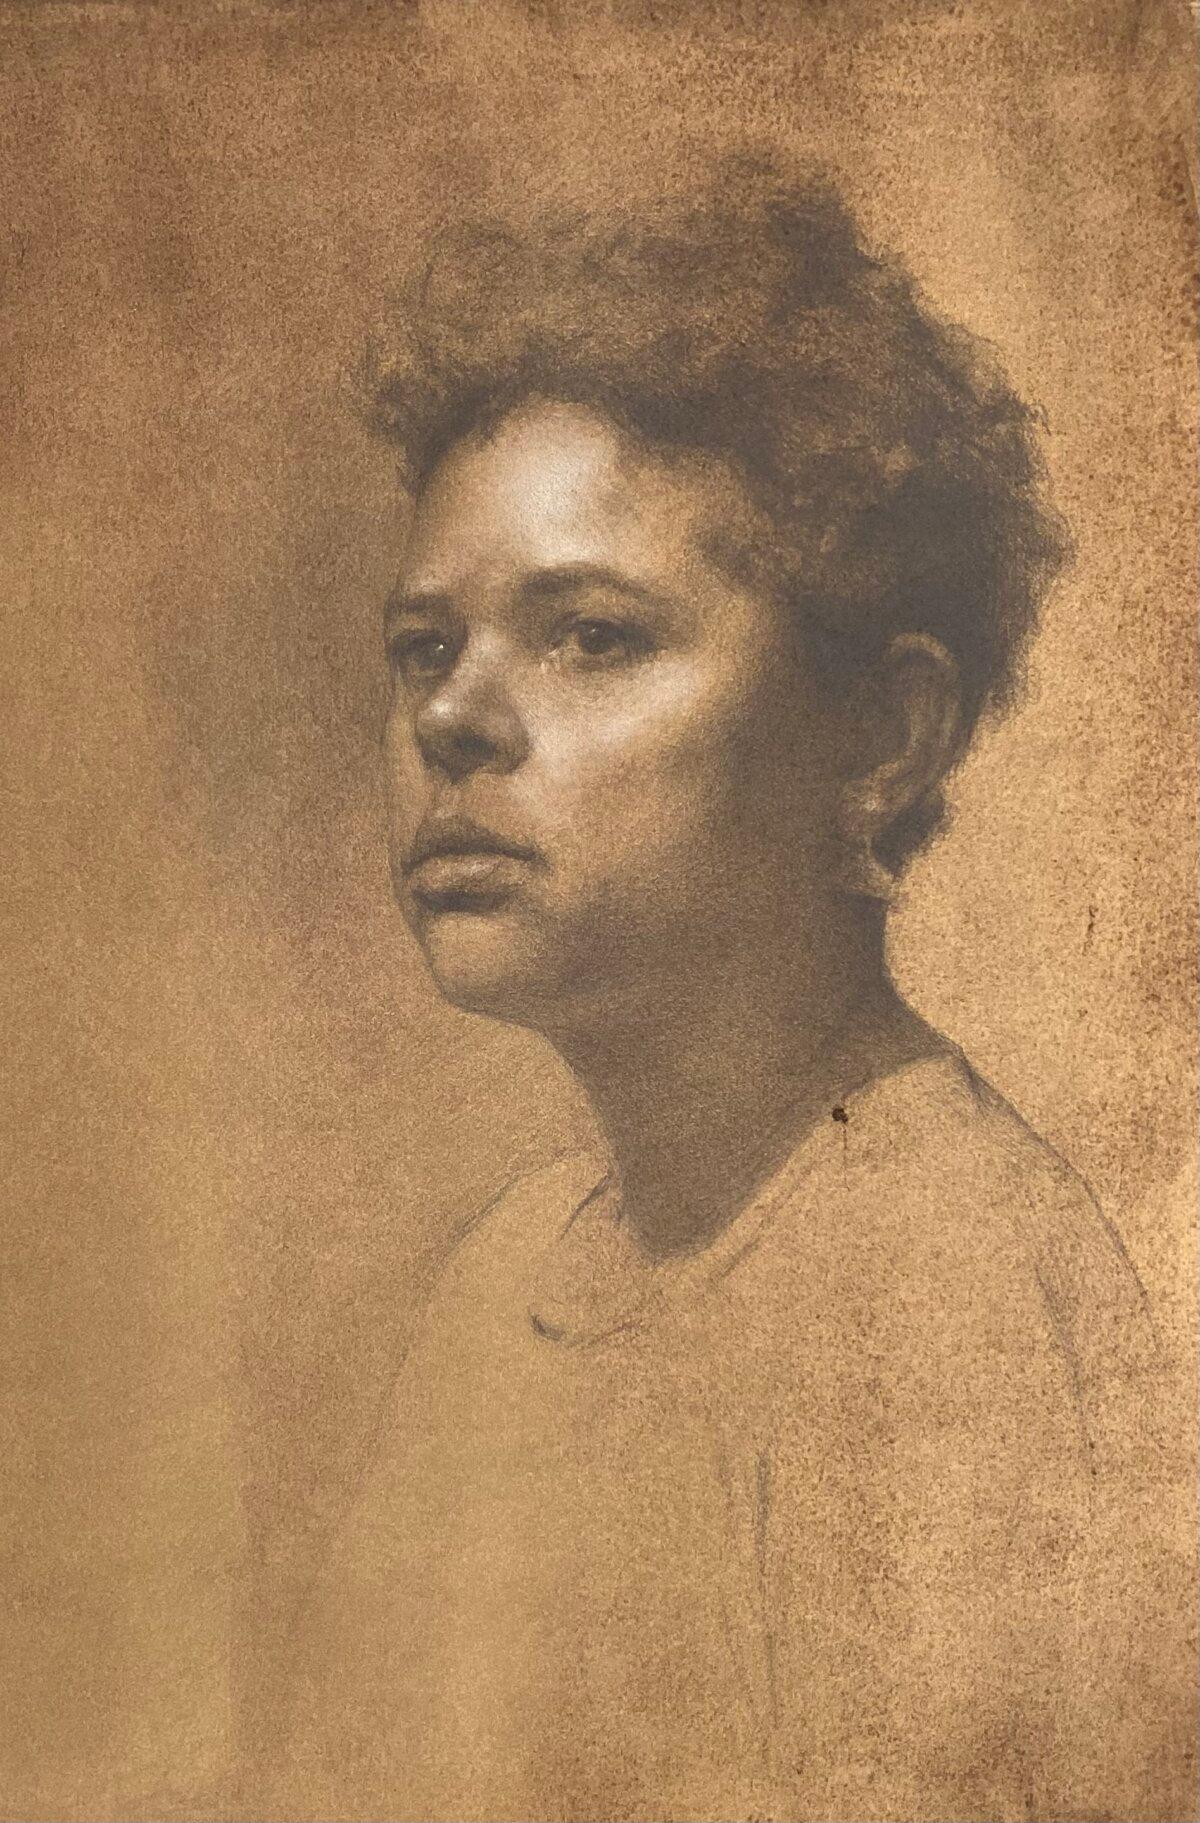 “December's Goodbye” by Laura Arenson of London. Graphite and chalk on hand-toned paper; 20.4 inches by 14.1 inches. (Courtesy of the Portrait Society of America)